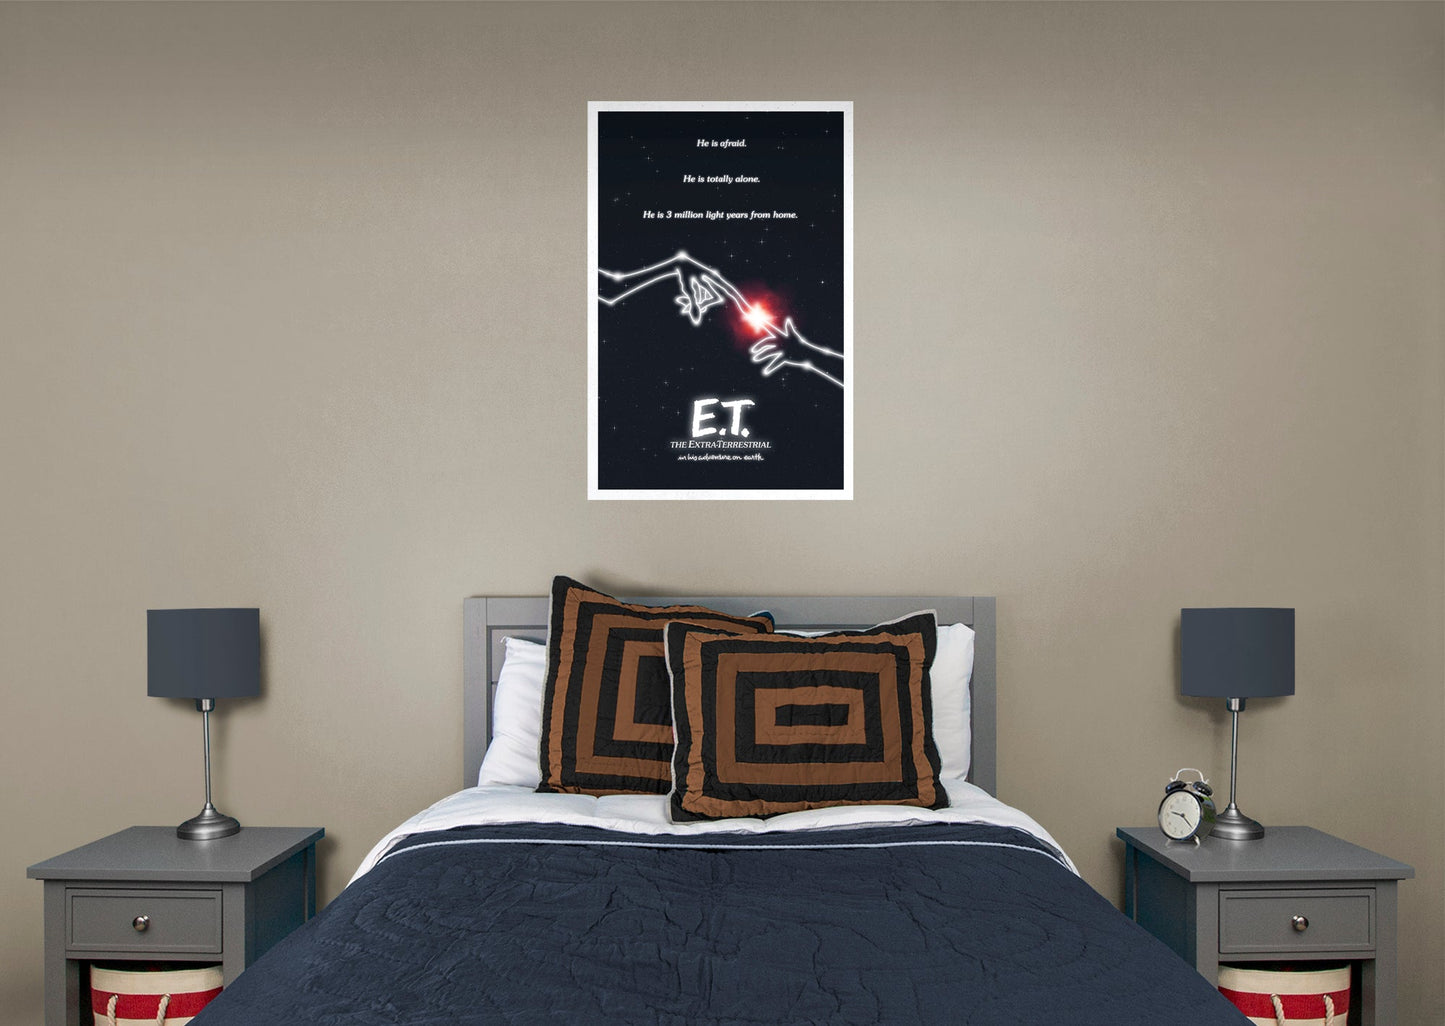 E.T.: E.T. Constellation Hands 40th Anniversary Poster - Officially Licensed NBC Universal Removable Adhesive Decal